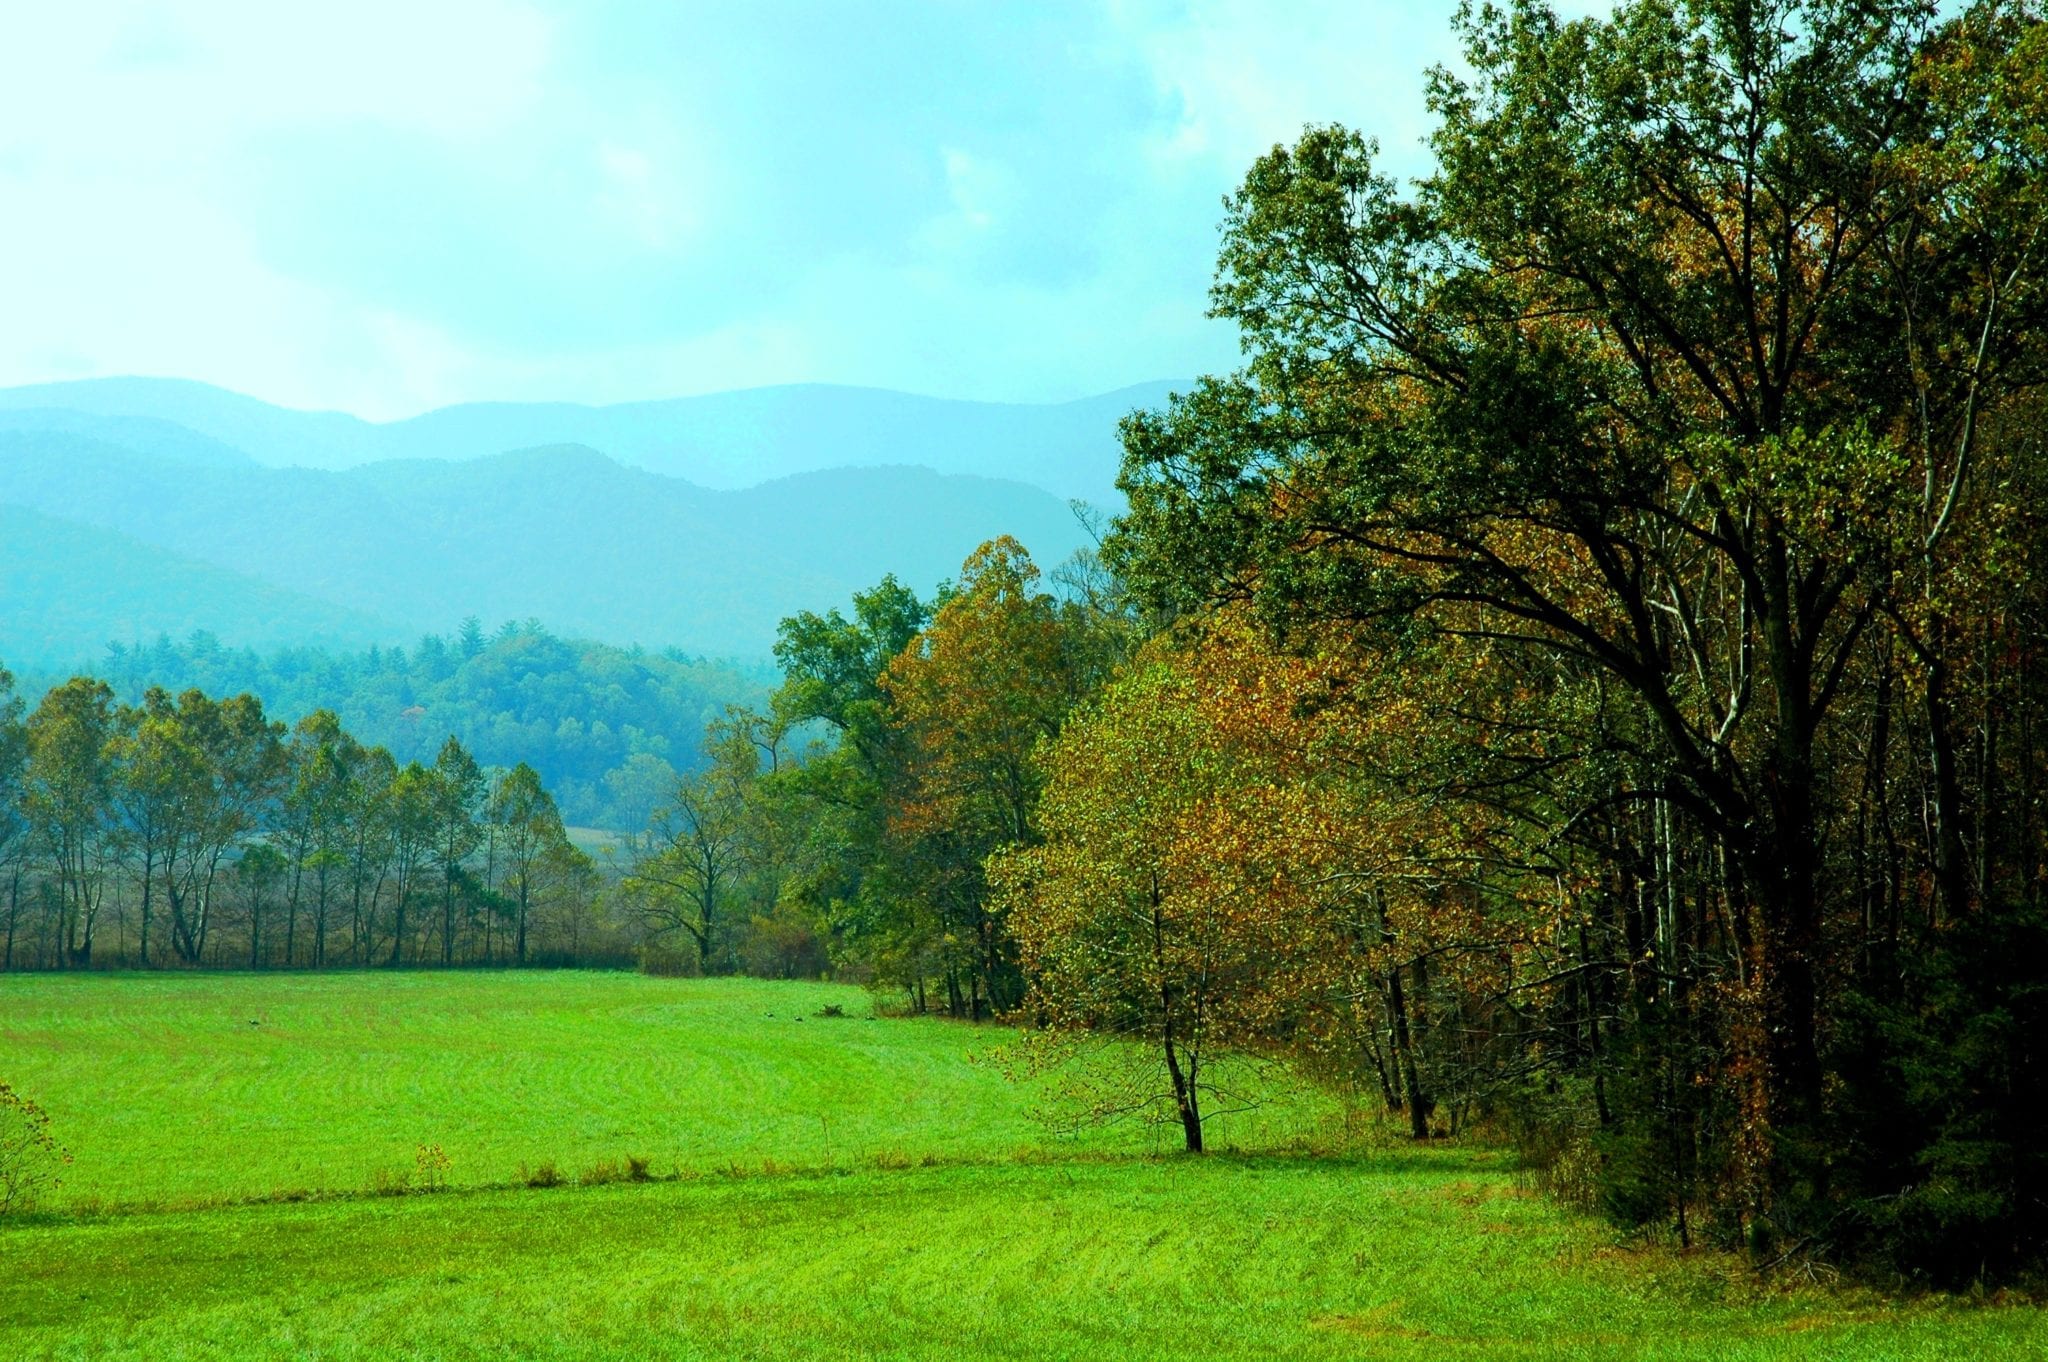 cades cove with mountains